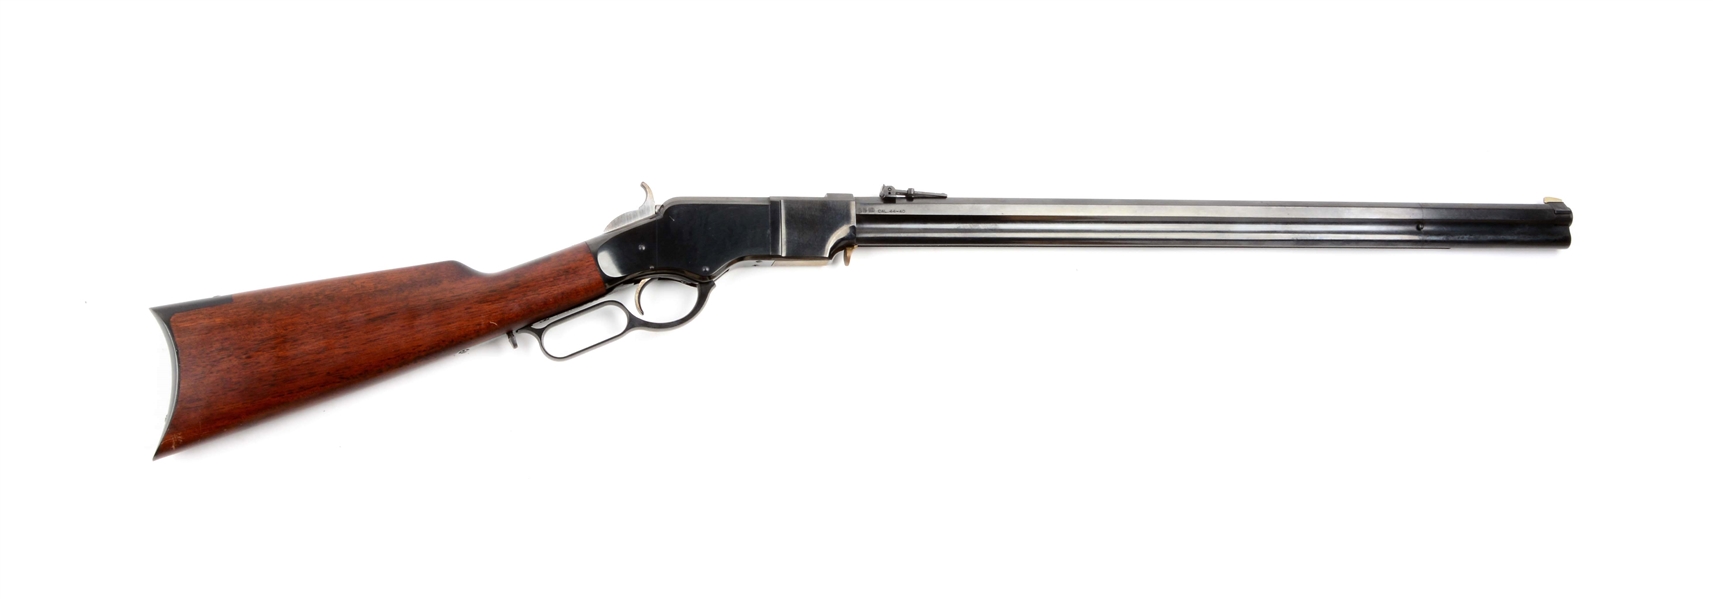 (M) STEEL FRAME NAVY ARMS MODEL 1860 HENRY LEVER ACTION REPEATING RIFLE.